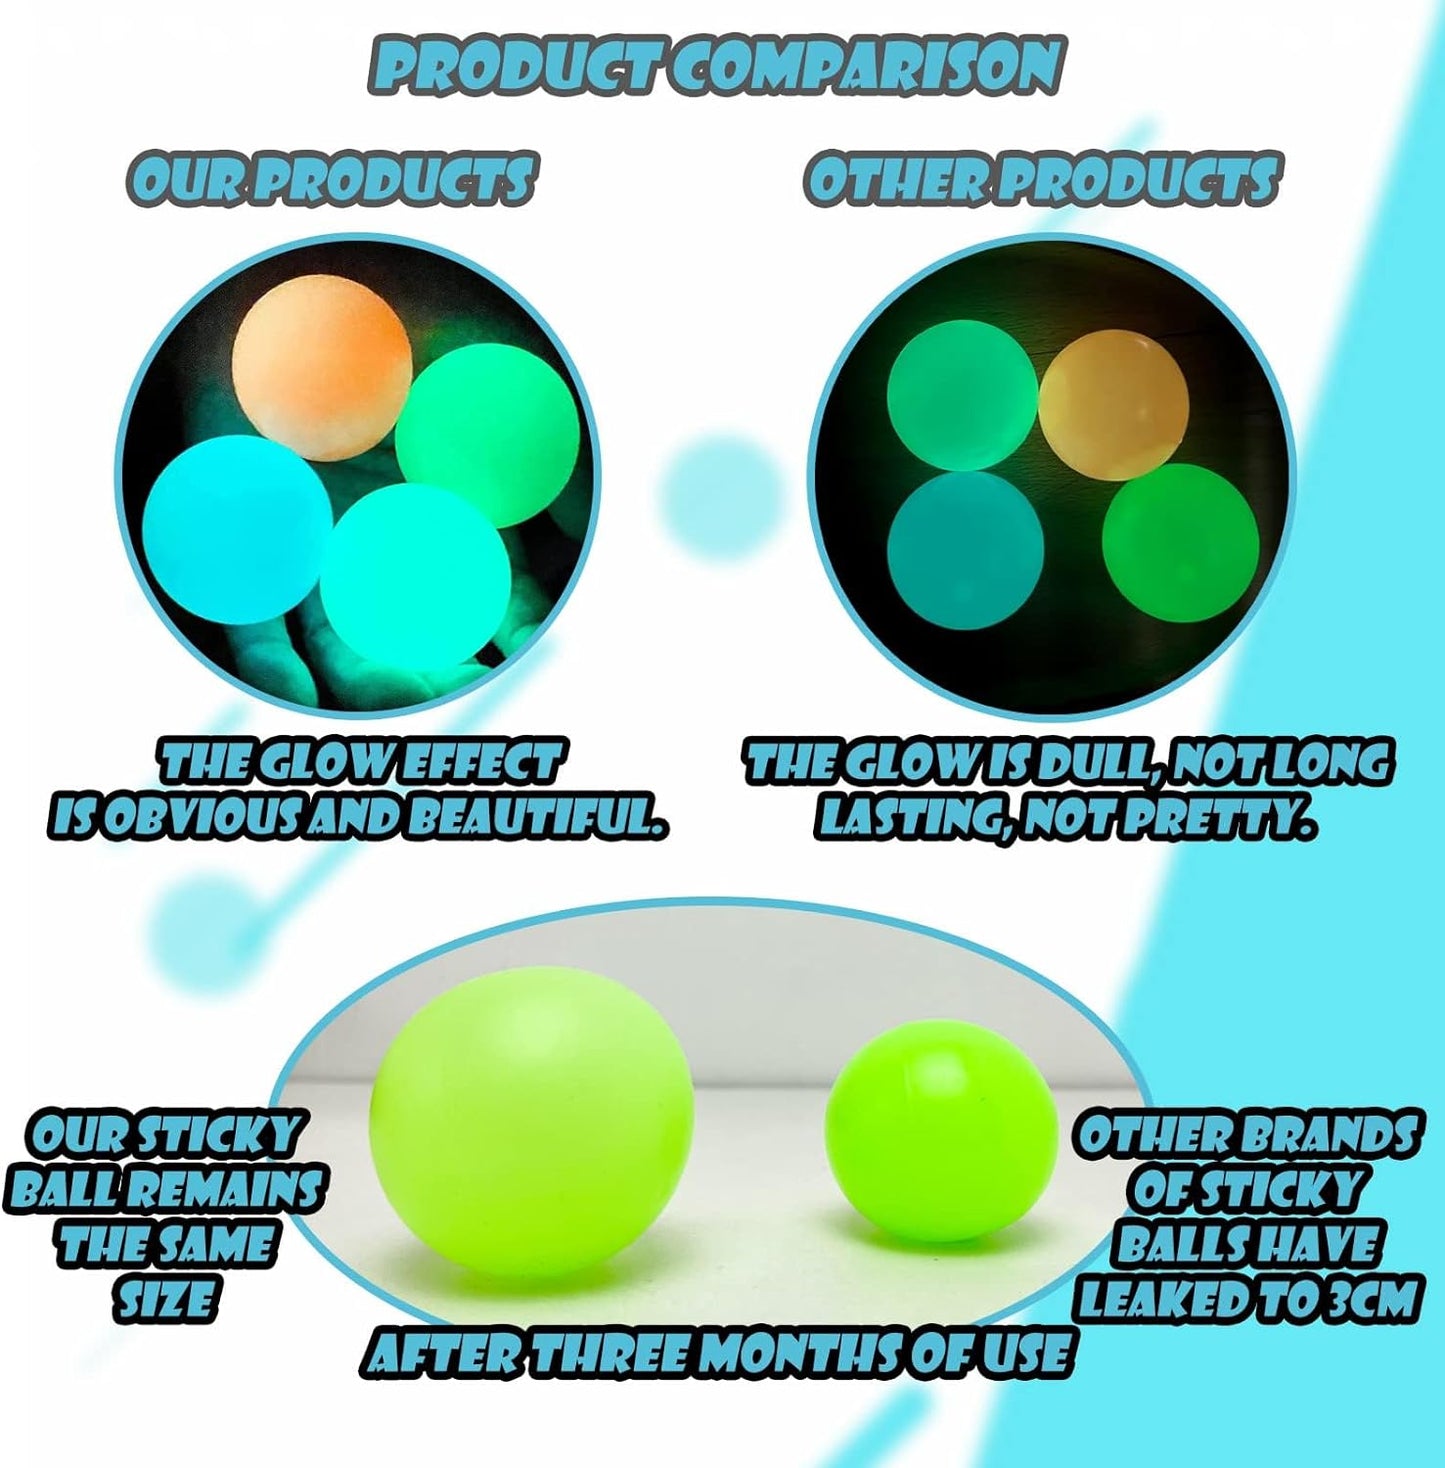 Glow in the Dark Sticky Balls That Stick to the Ceiling,Stress Balls for Kids and Adults,Asmr Stuff,Squishy Ball Toys,Ceiling Balls,Sensory Balls,Dream Balls,Fidget Toys,Gift,Stocking Stuffers(4Pcs)